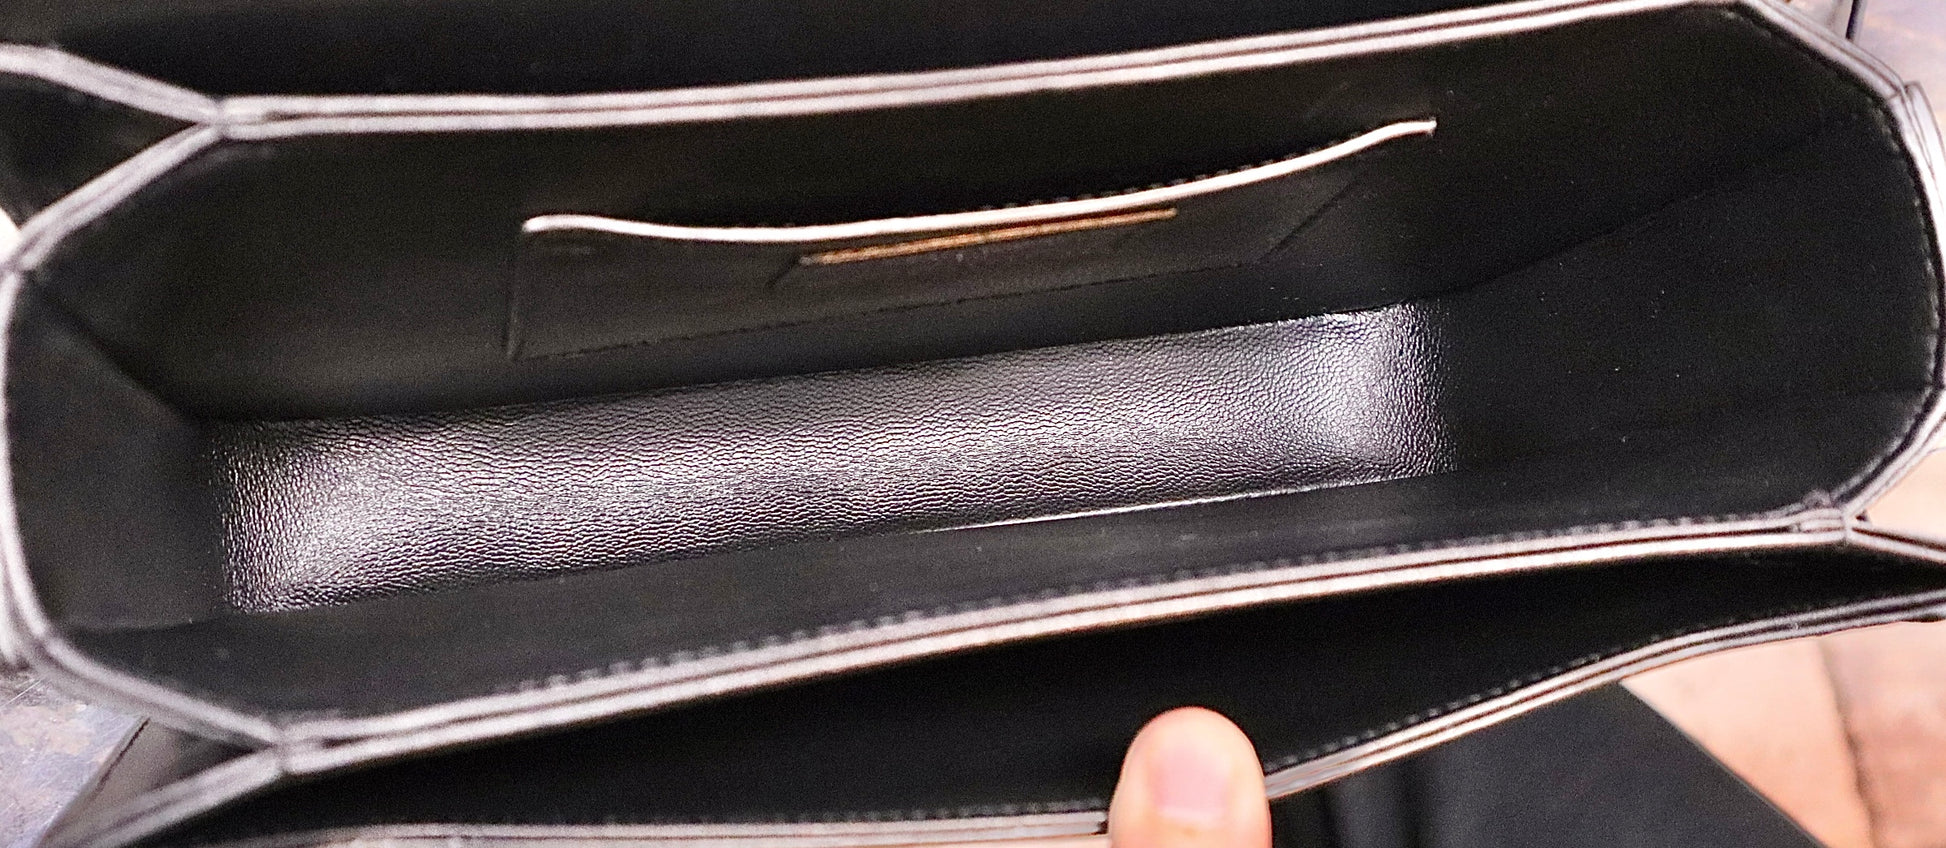 Inside of bag with black leather